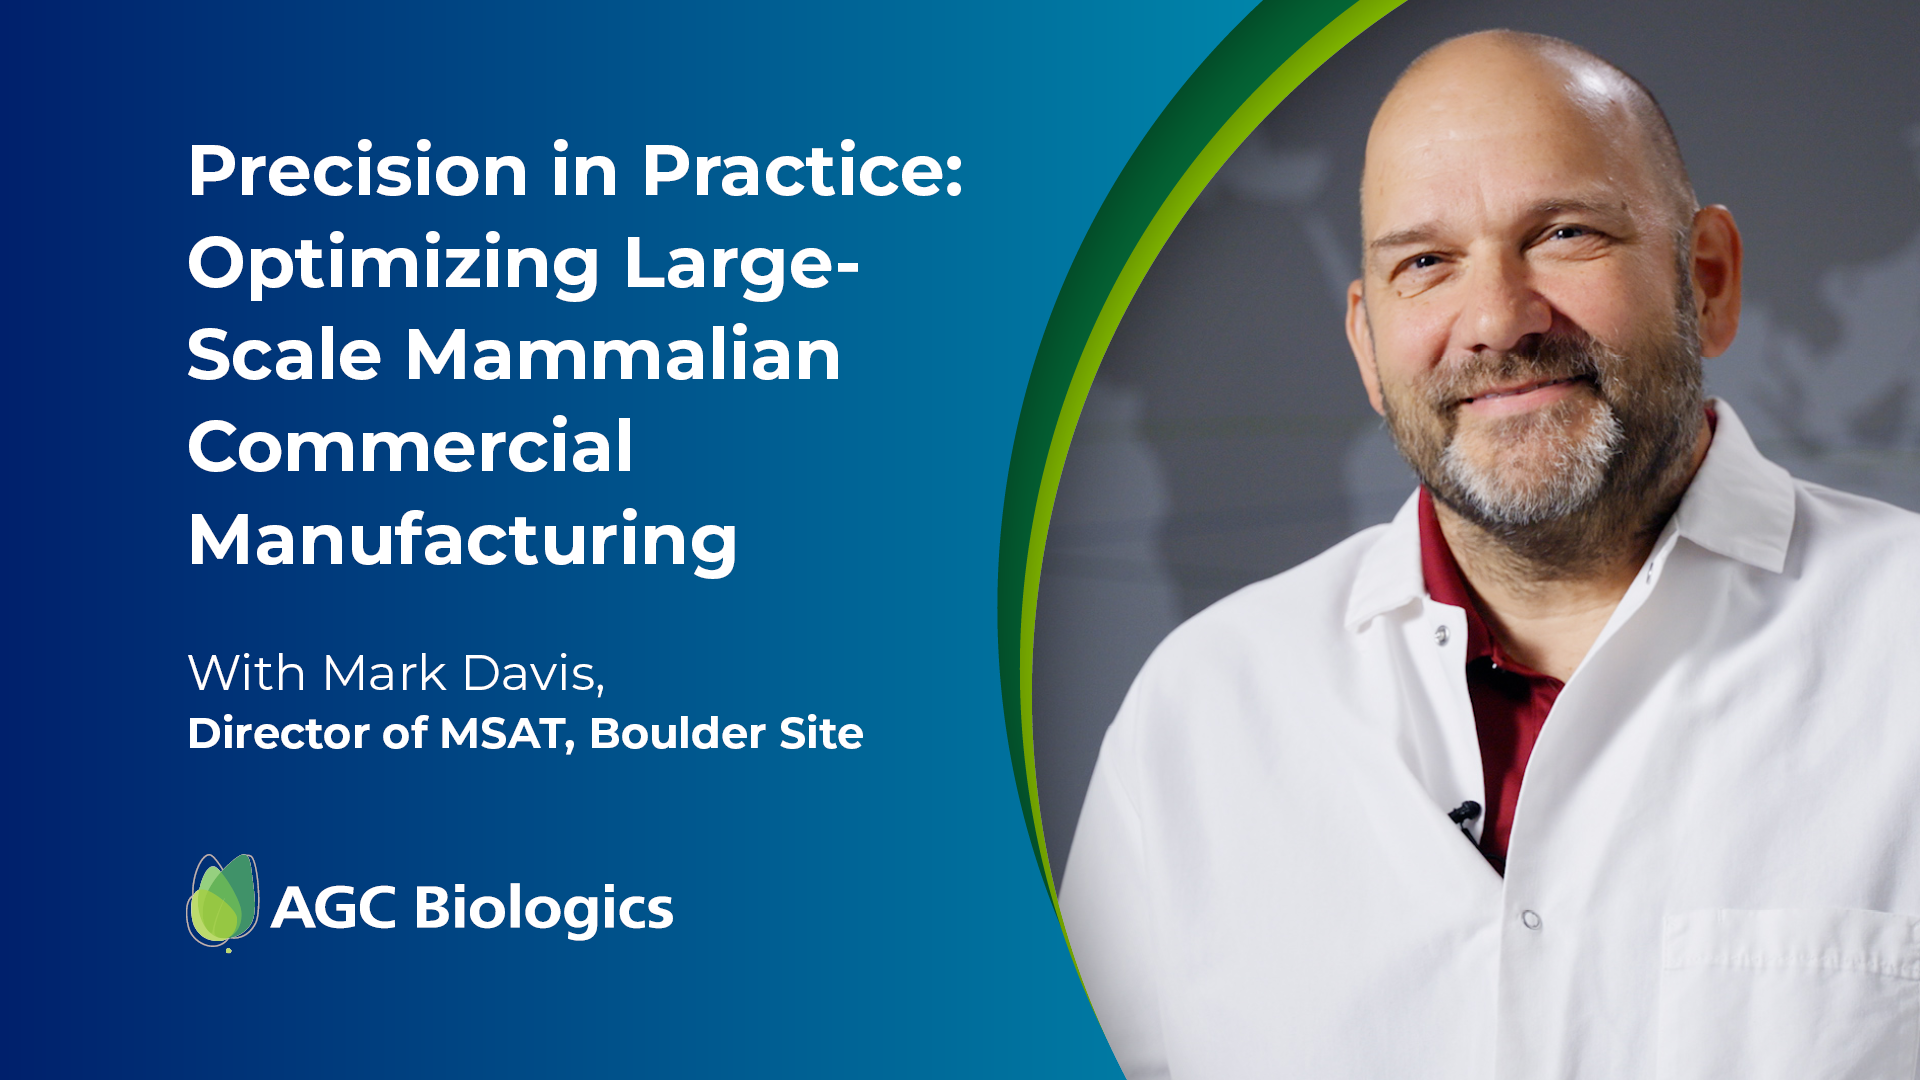 Watch our video as one of our MSAT specialists discusses building strategic mammalian manufacturing processes.